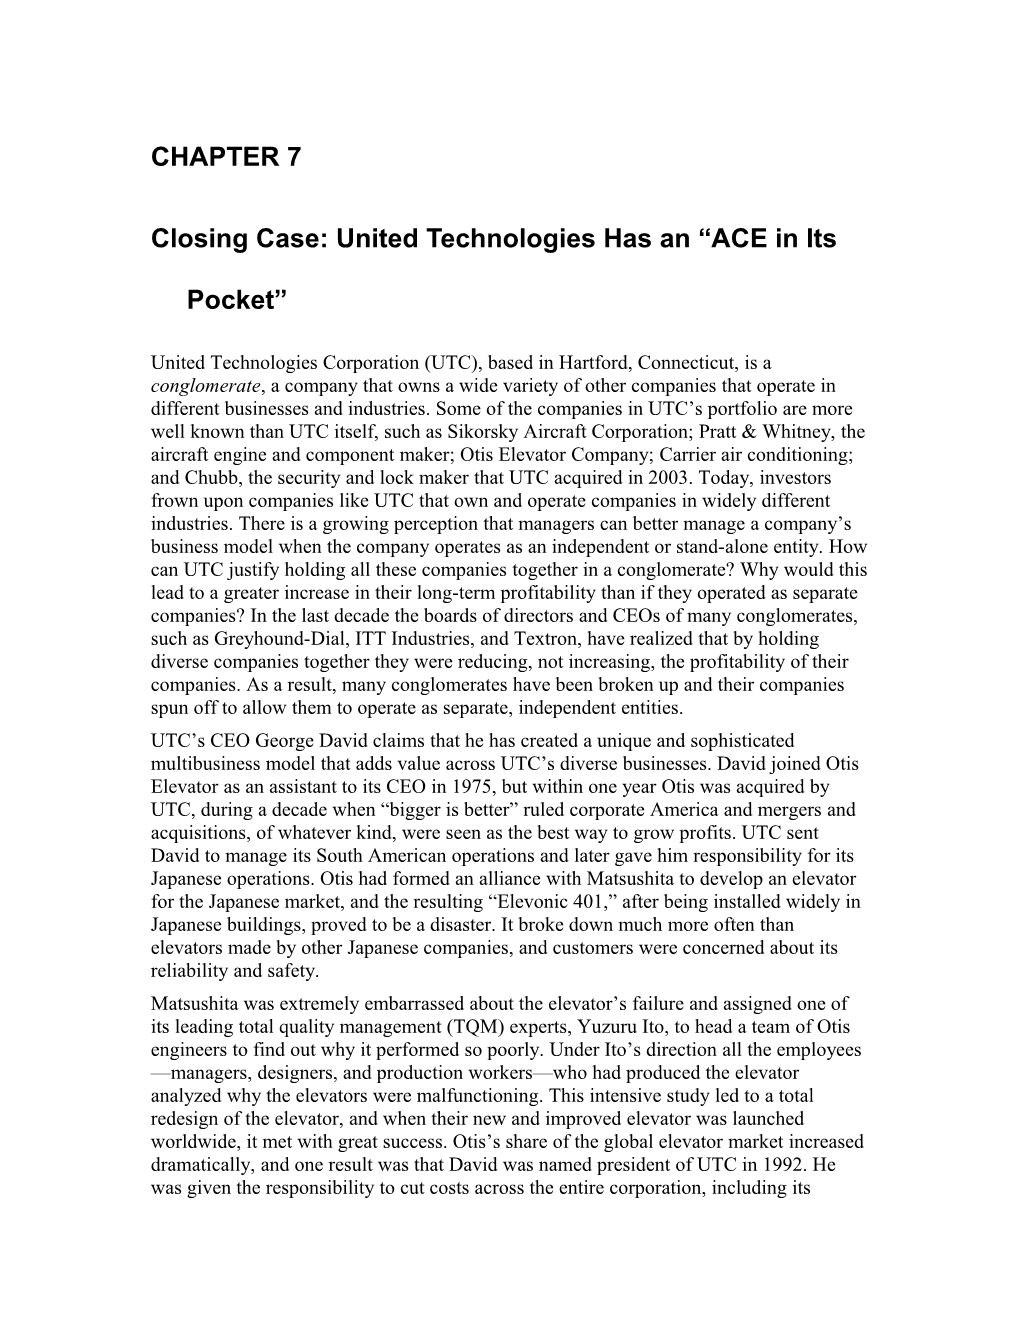 Closing Case: United Technologies Has an ACE in Its Pocket